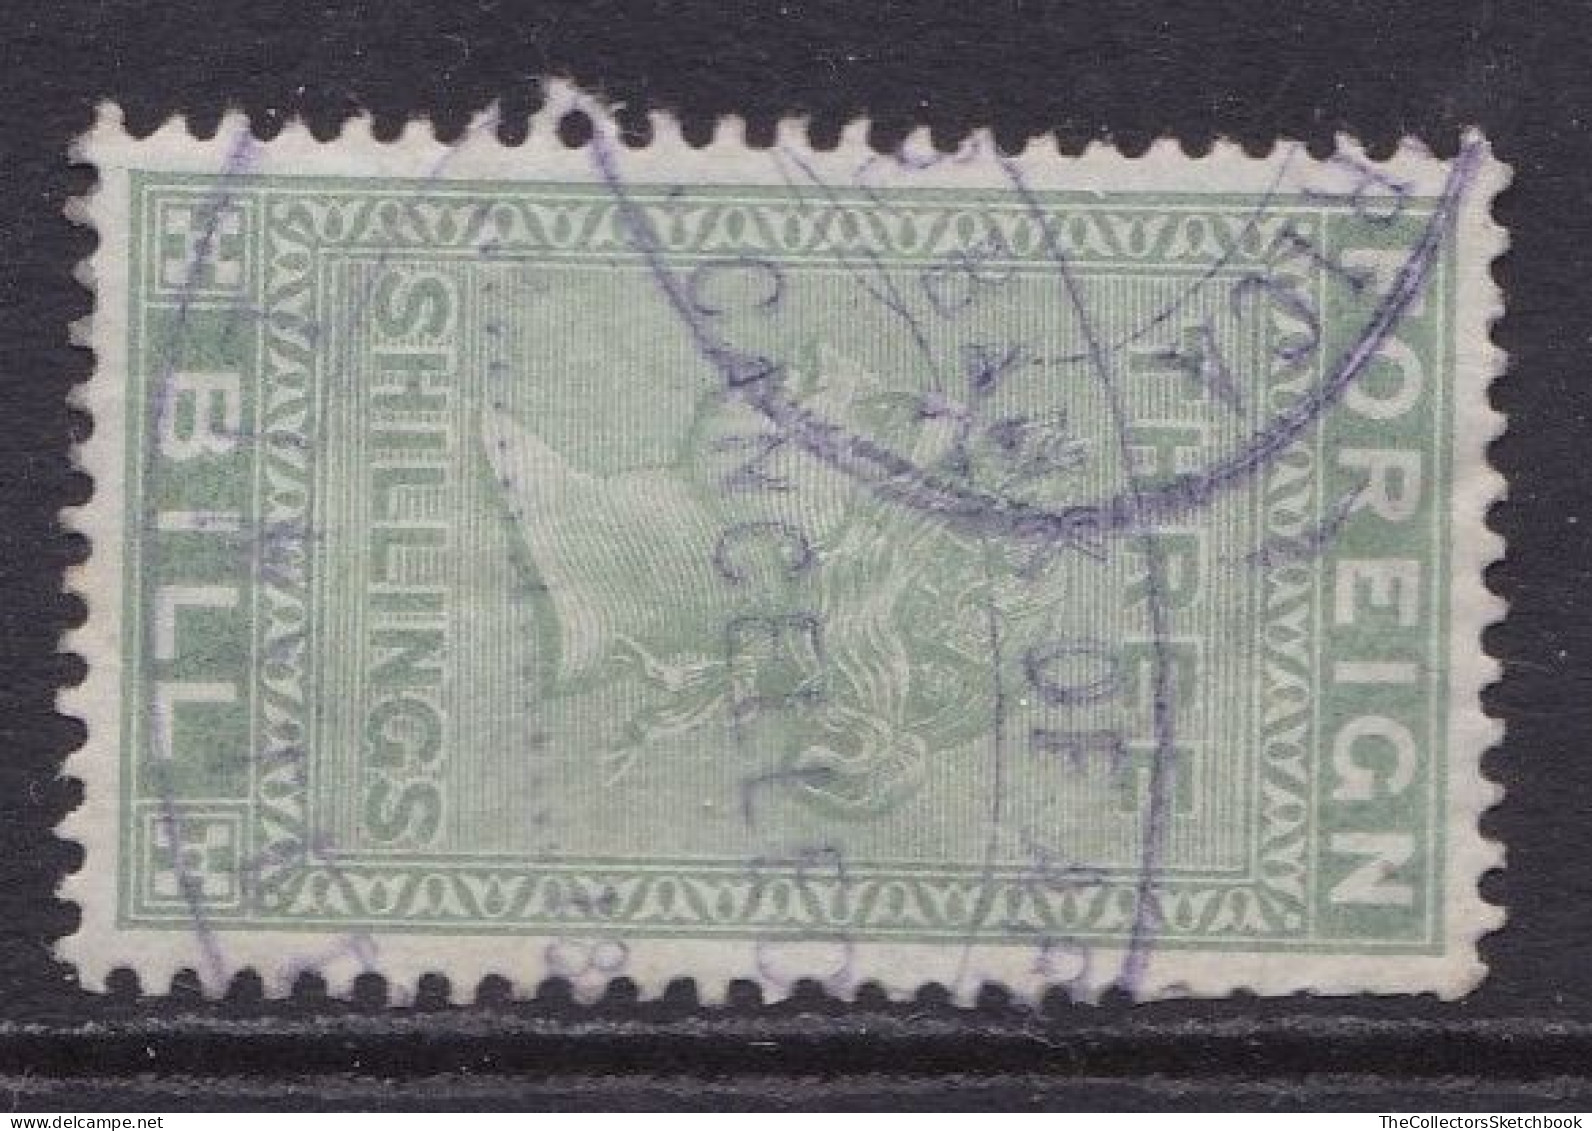 GB Fiscal/ Revenue Stamp. Foreign Bill 3/ - Green  Perf 14 Barefoot 92 - Revenue Stamps